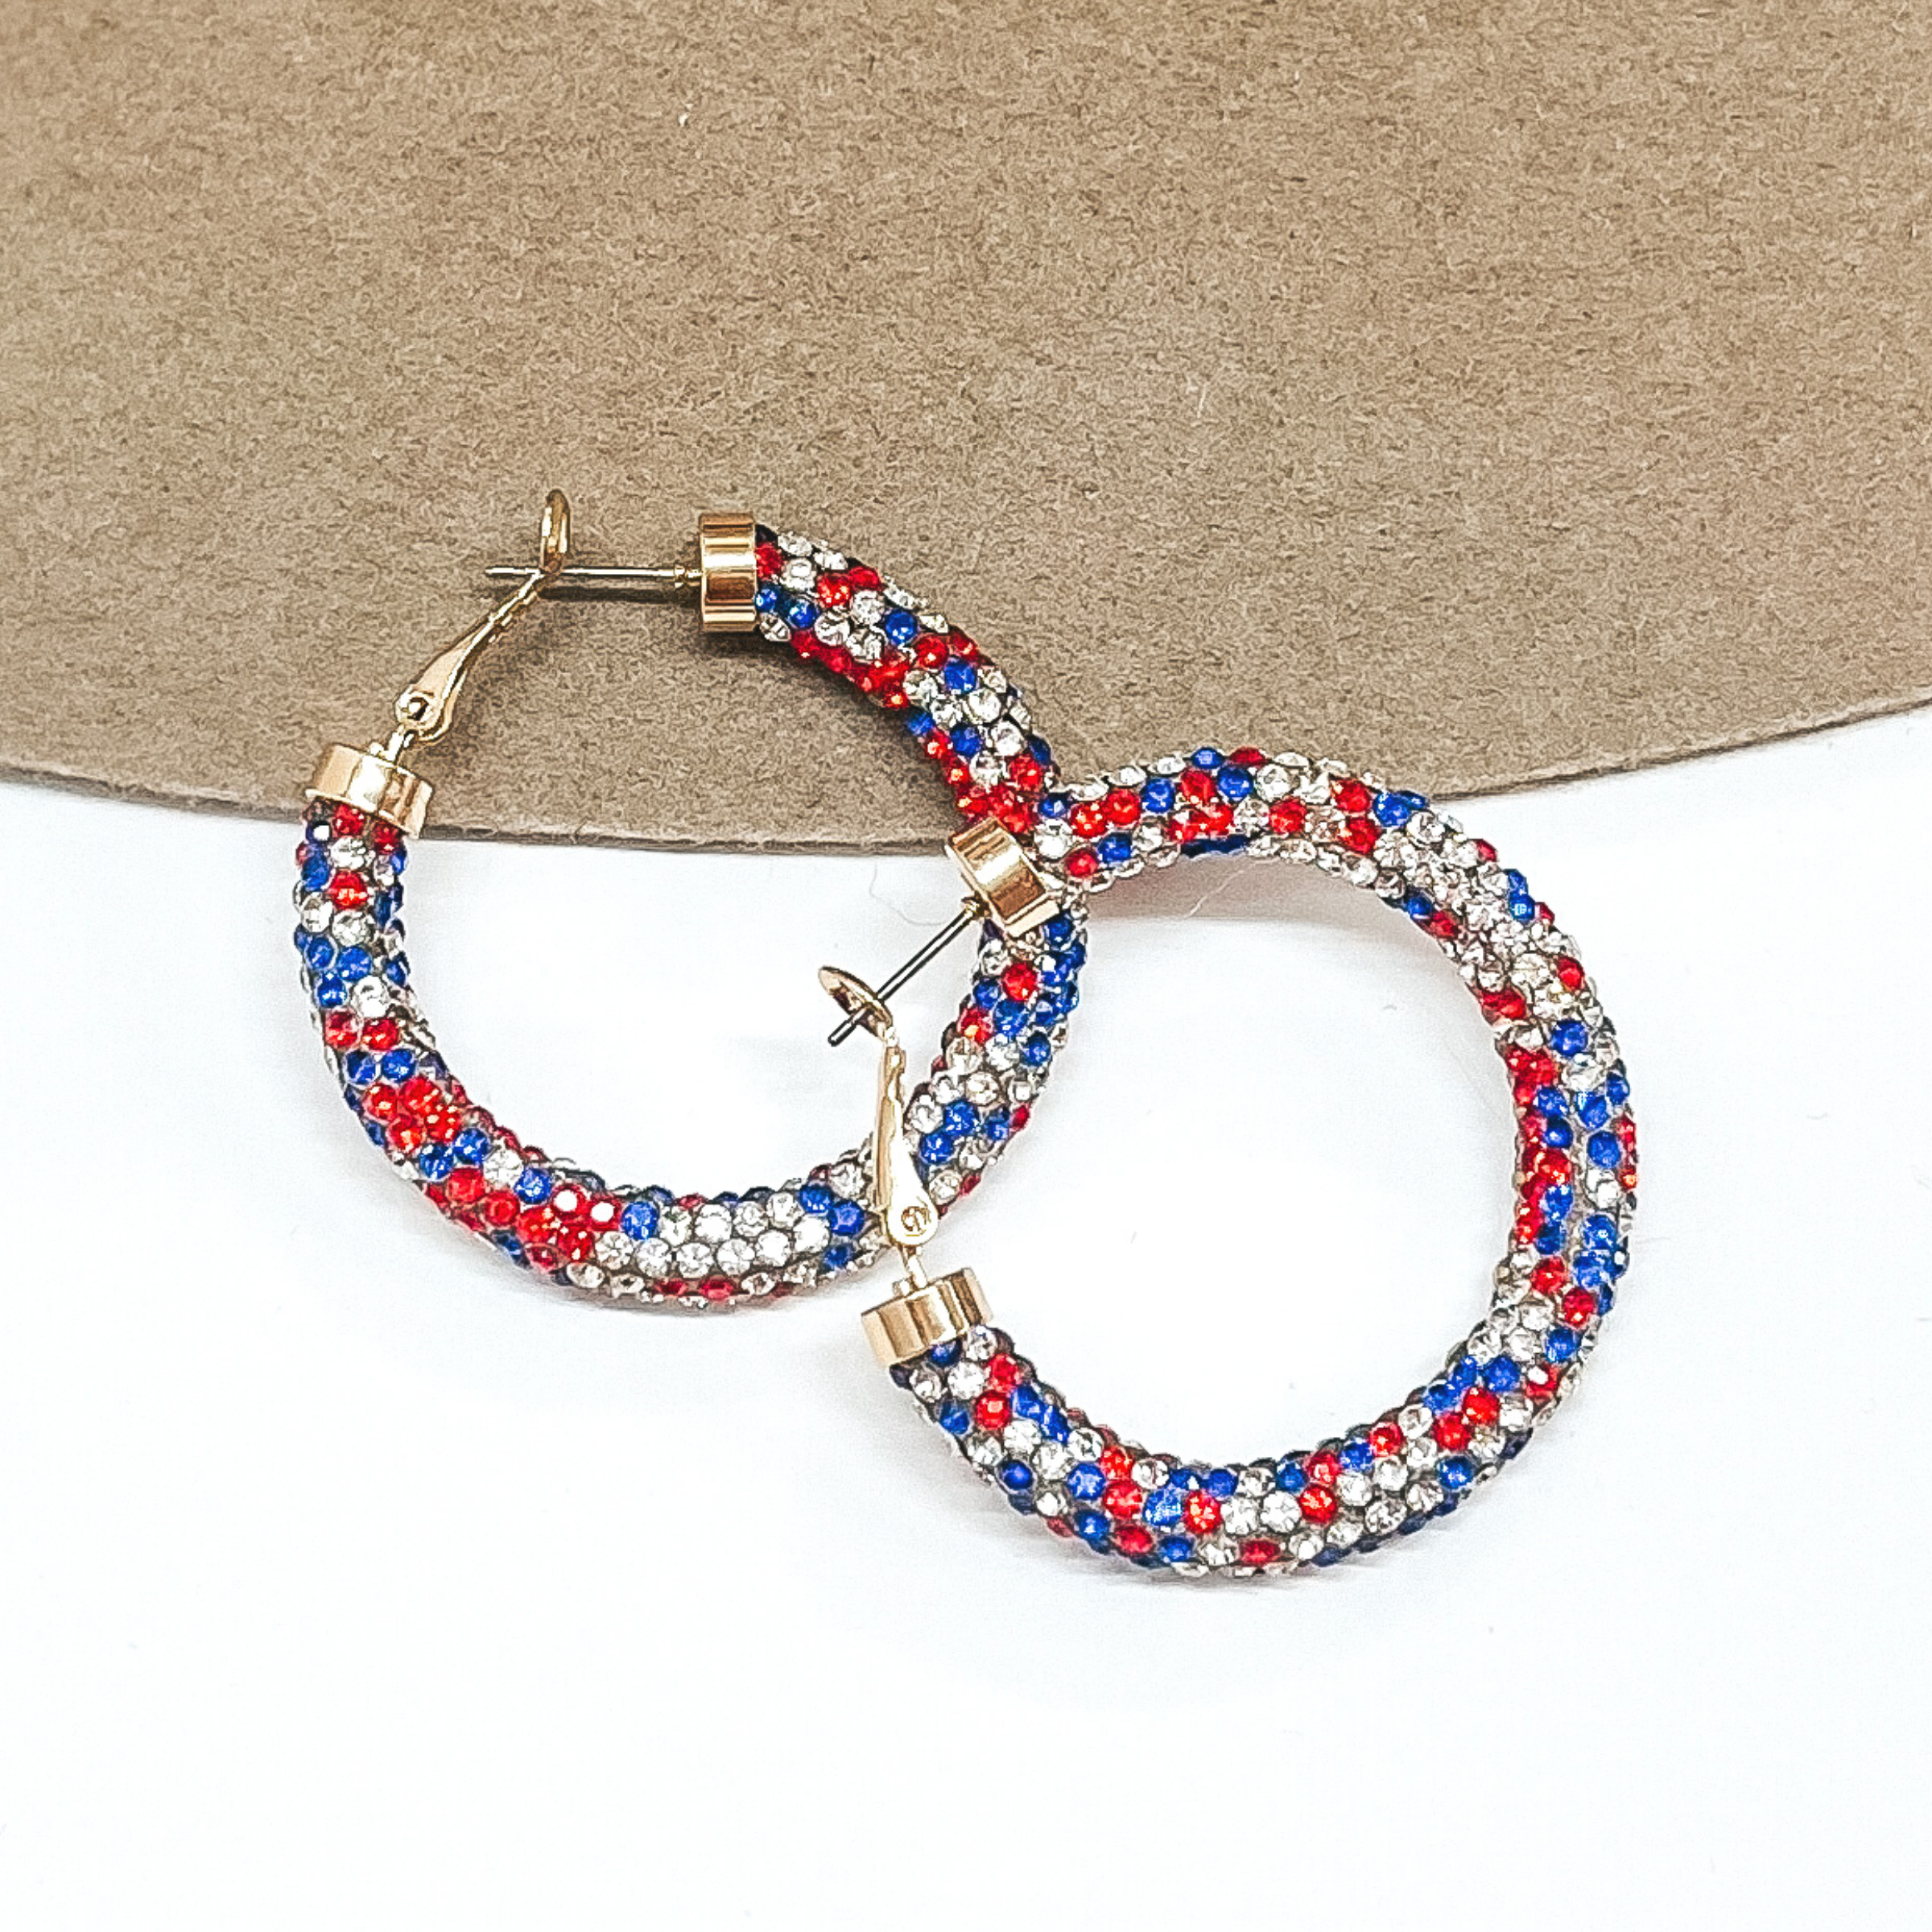 Hoop earrings with a rhinstone mesh covering that includes red, white, and blue colors. These hoops have gold ends. These earrings are pictured on a brown and white background.